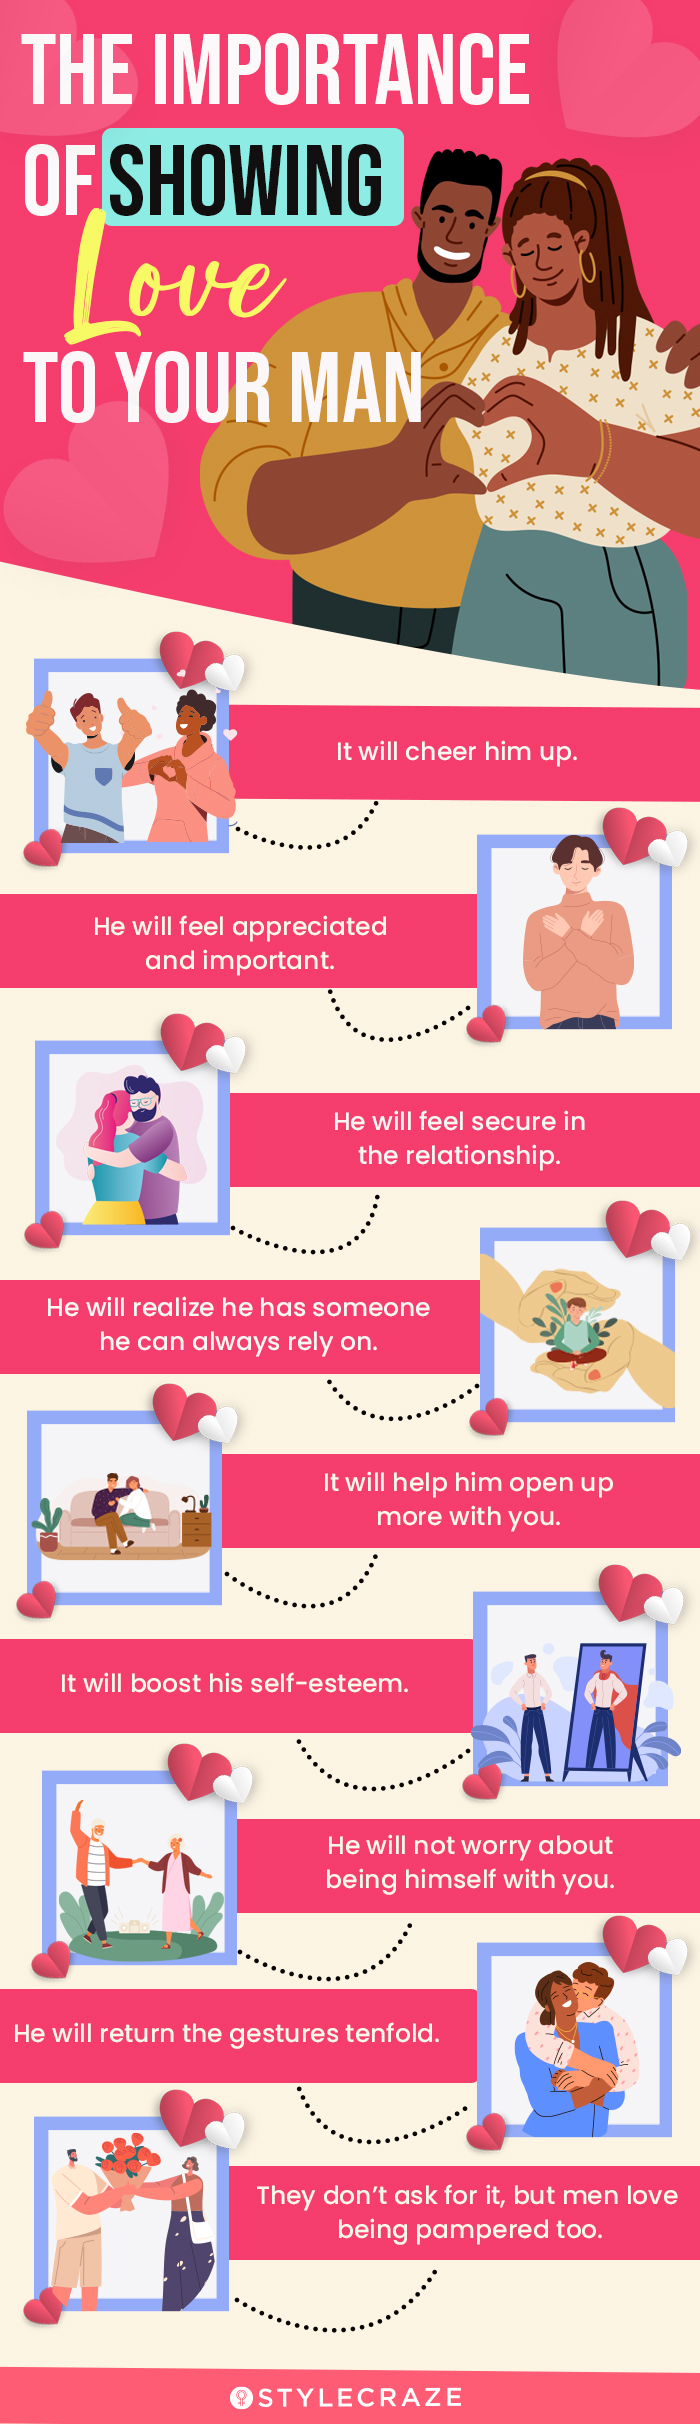 the importance of showing love to your man [infographic]